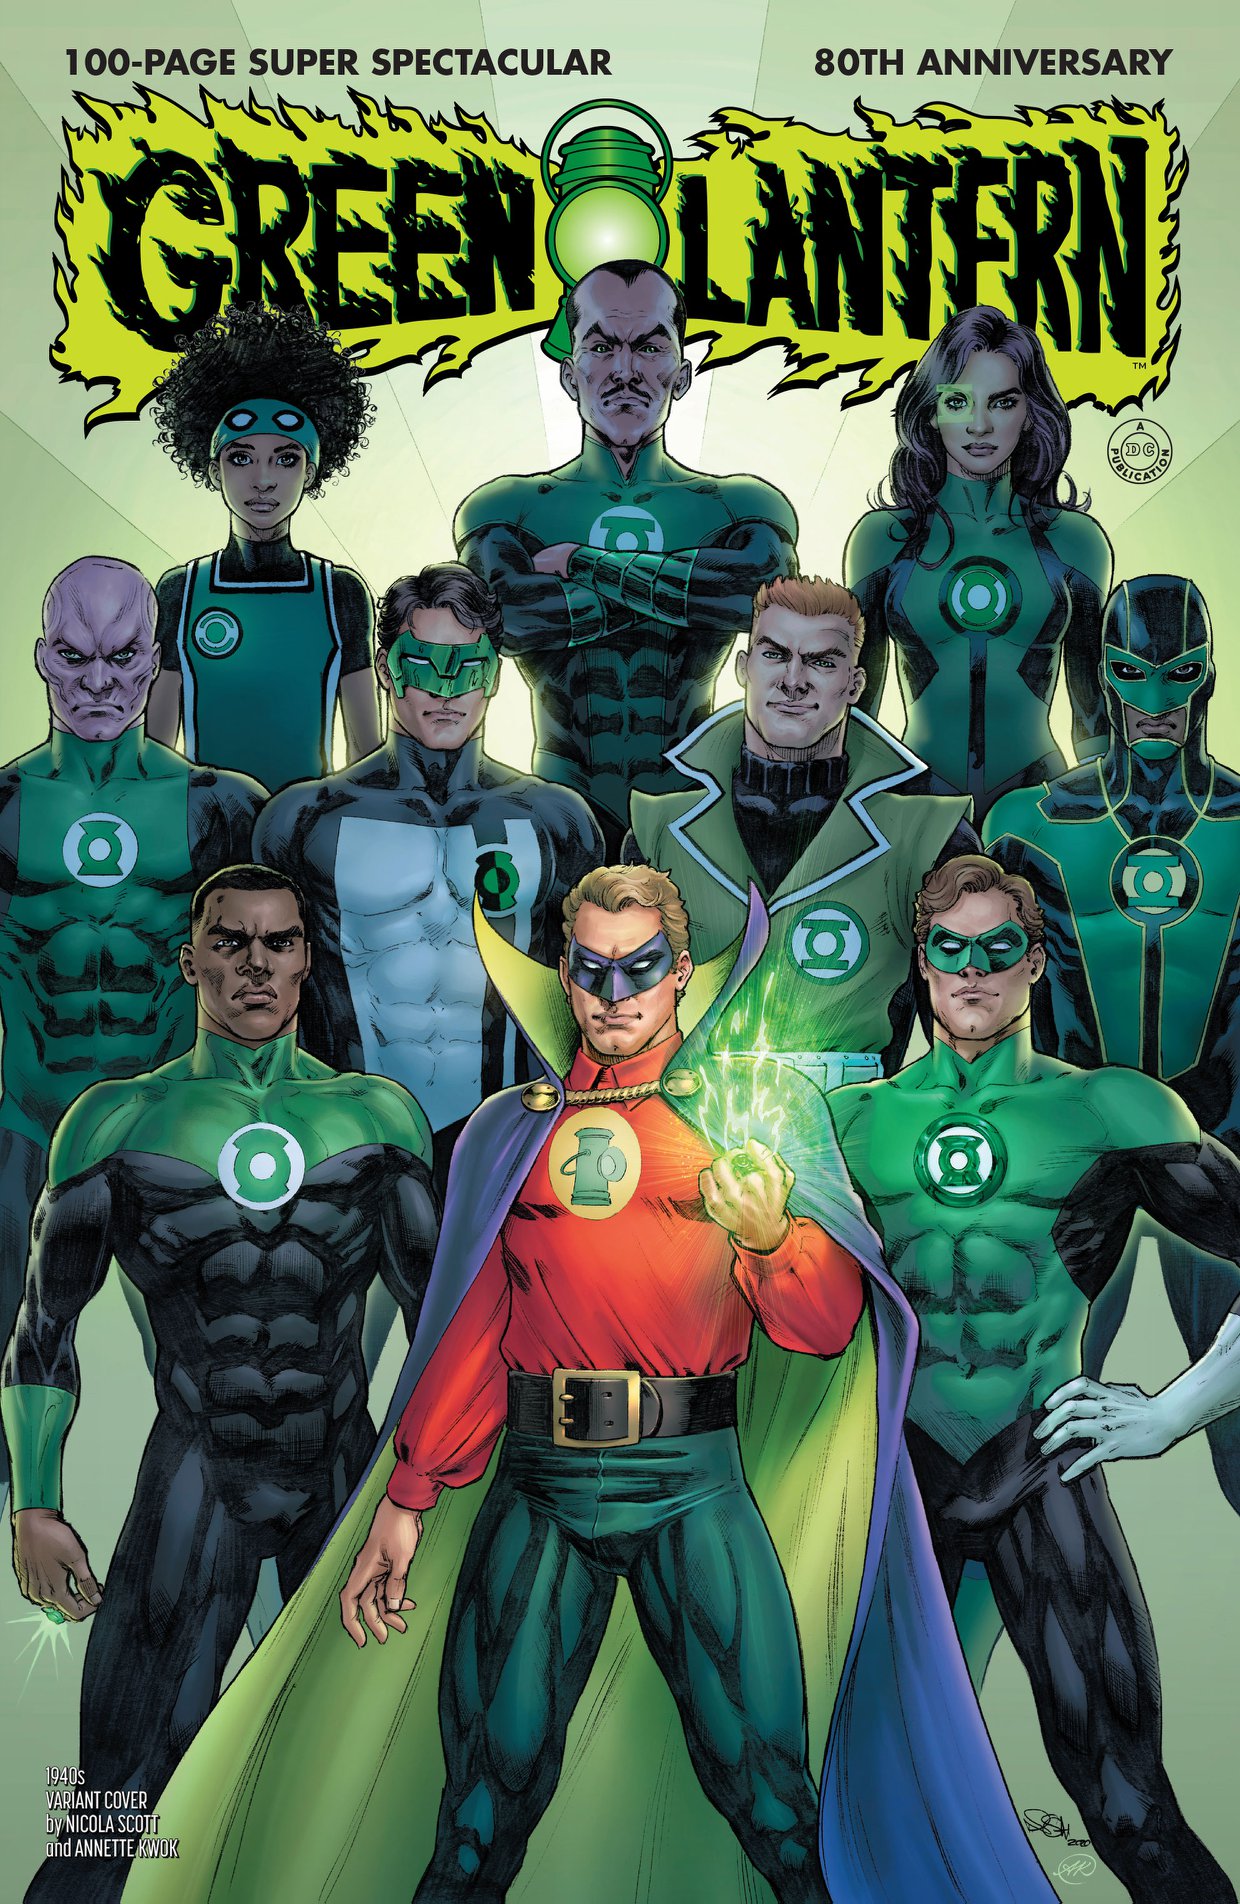 Green Lantern 80th Anniversary 100 Page Super Spectacular #1 1940s Variant Edition